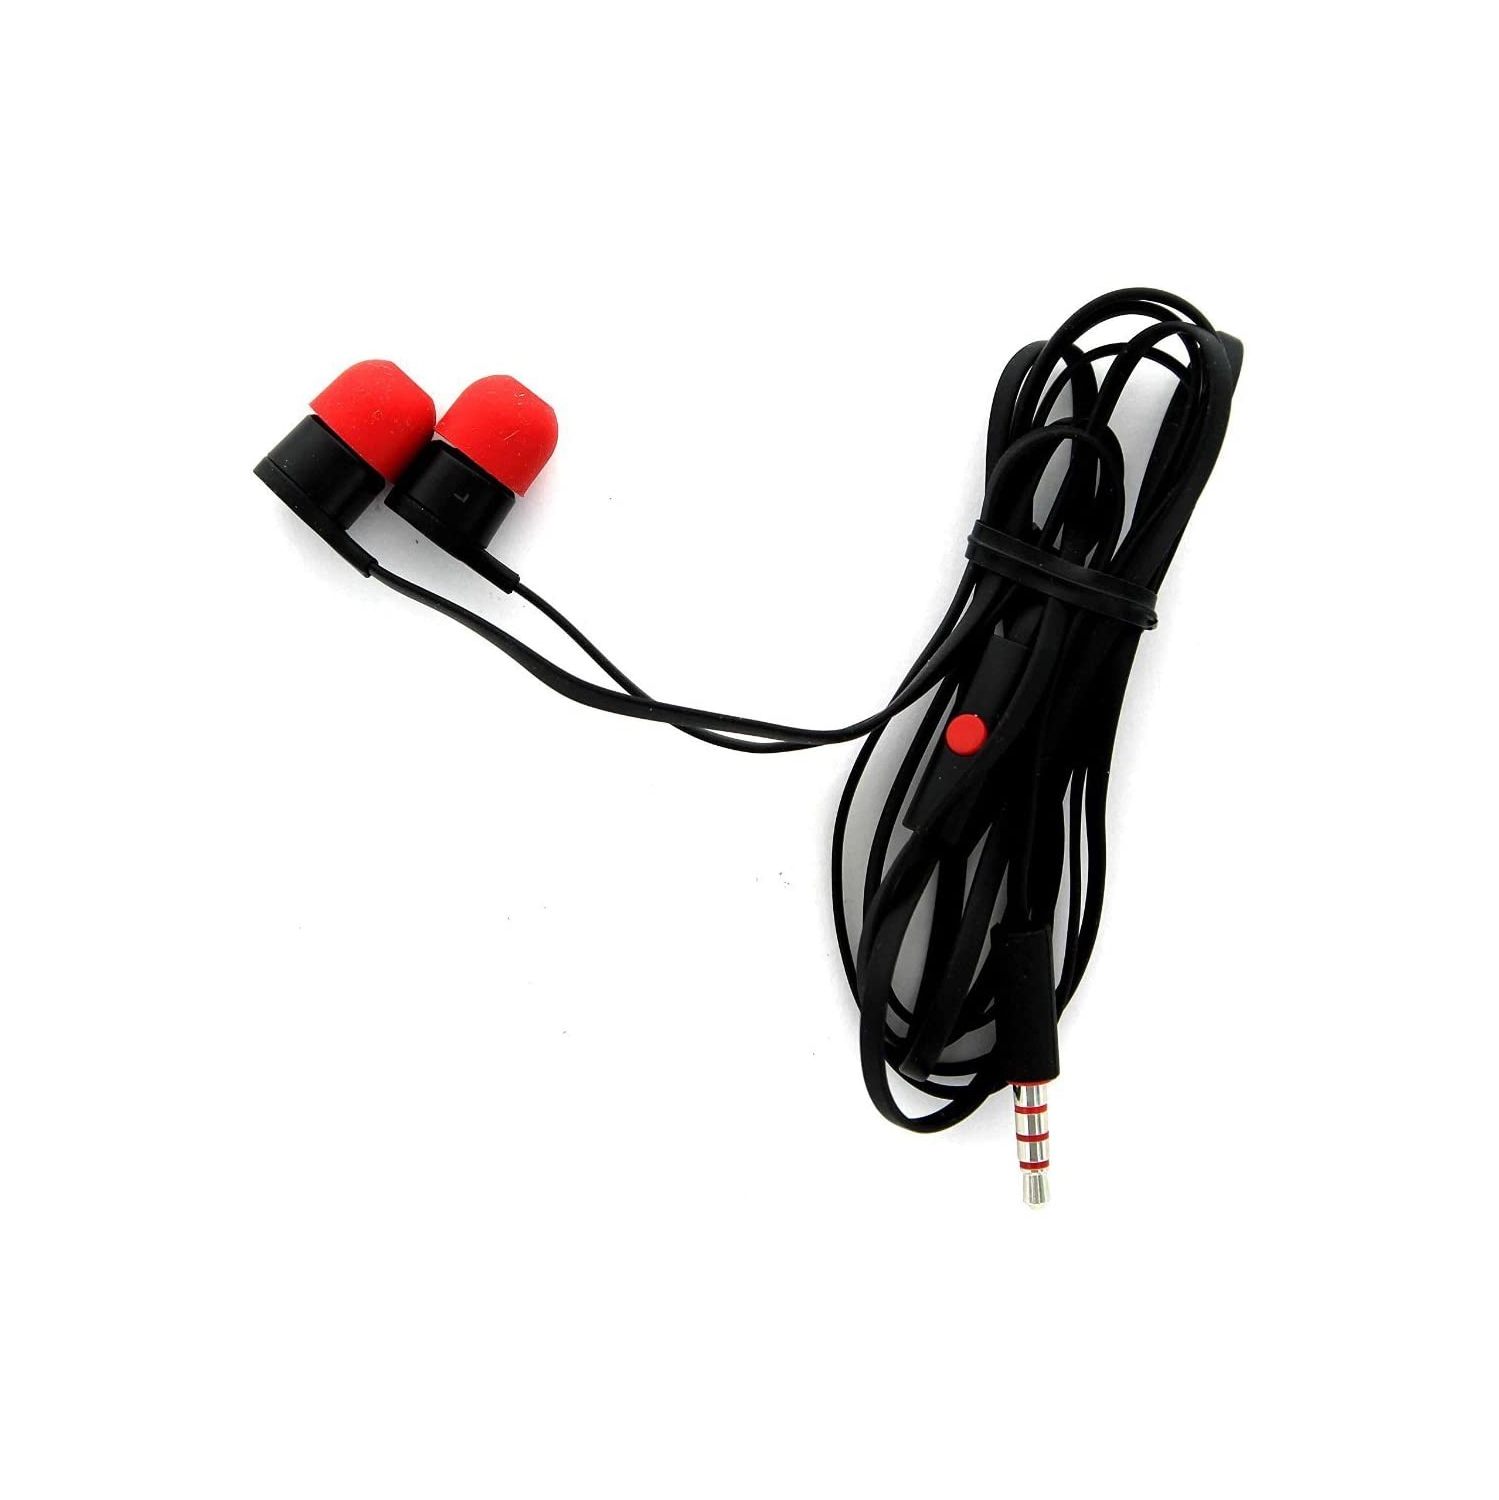 Original HTC 3.5mm Stereo Headset Headphone for HTC One HTC Butterfly HTC 8X 8S MAX300 T528 X920E 802W 802D ONE M7 BLACK RED